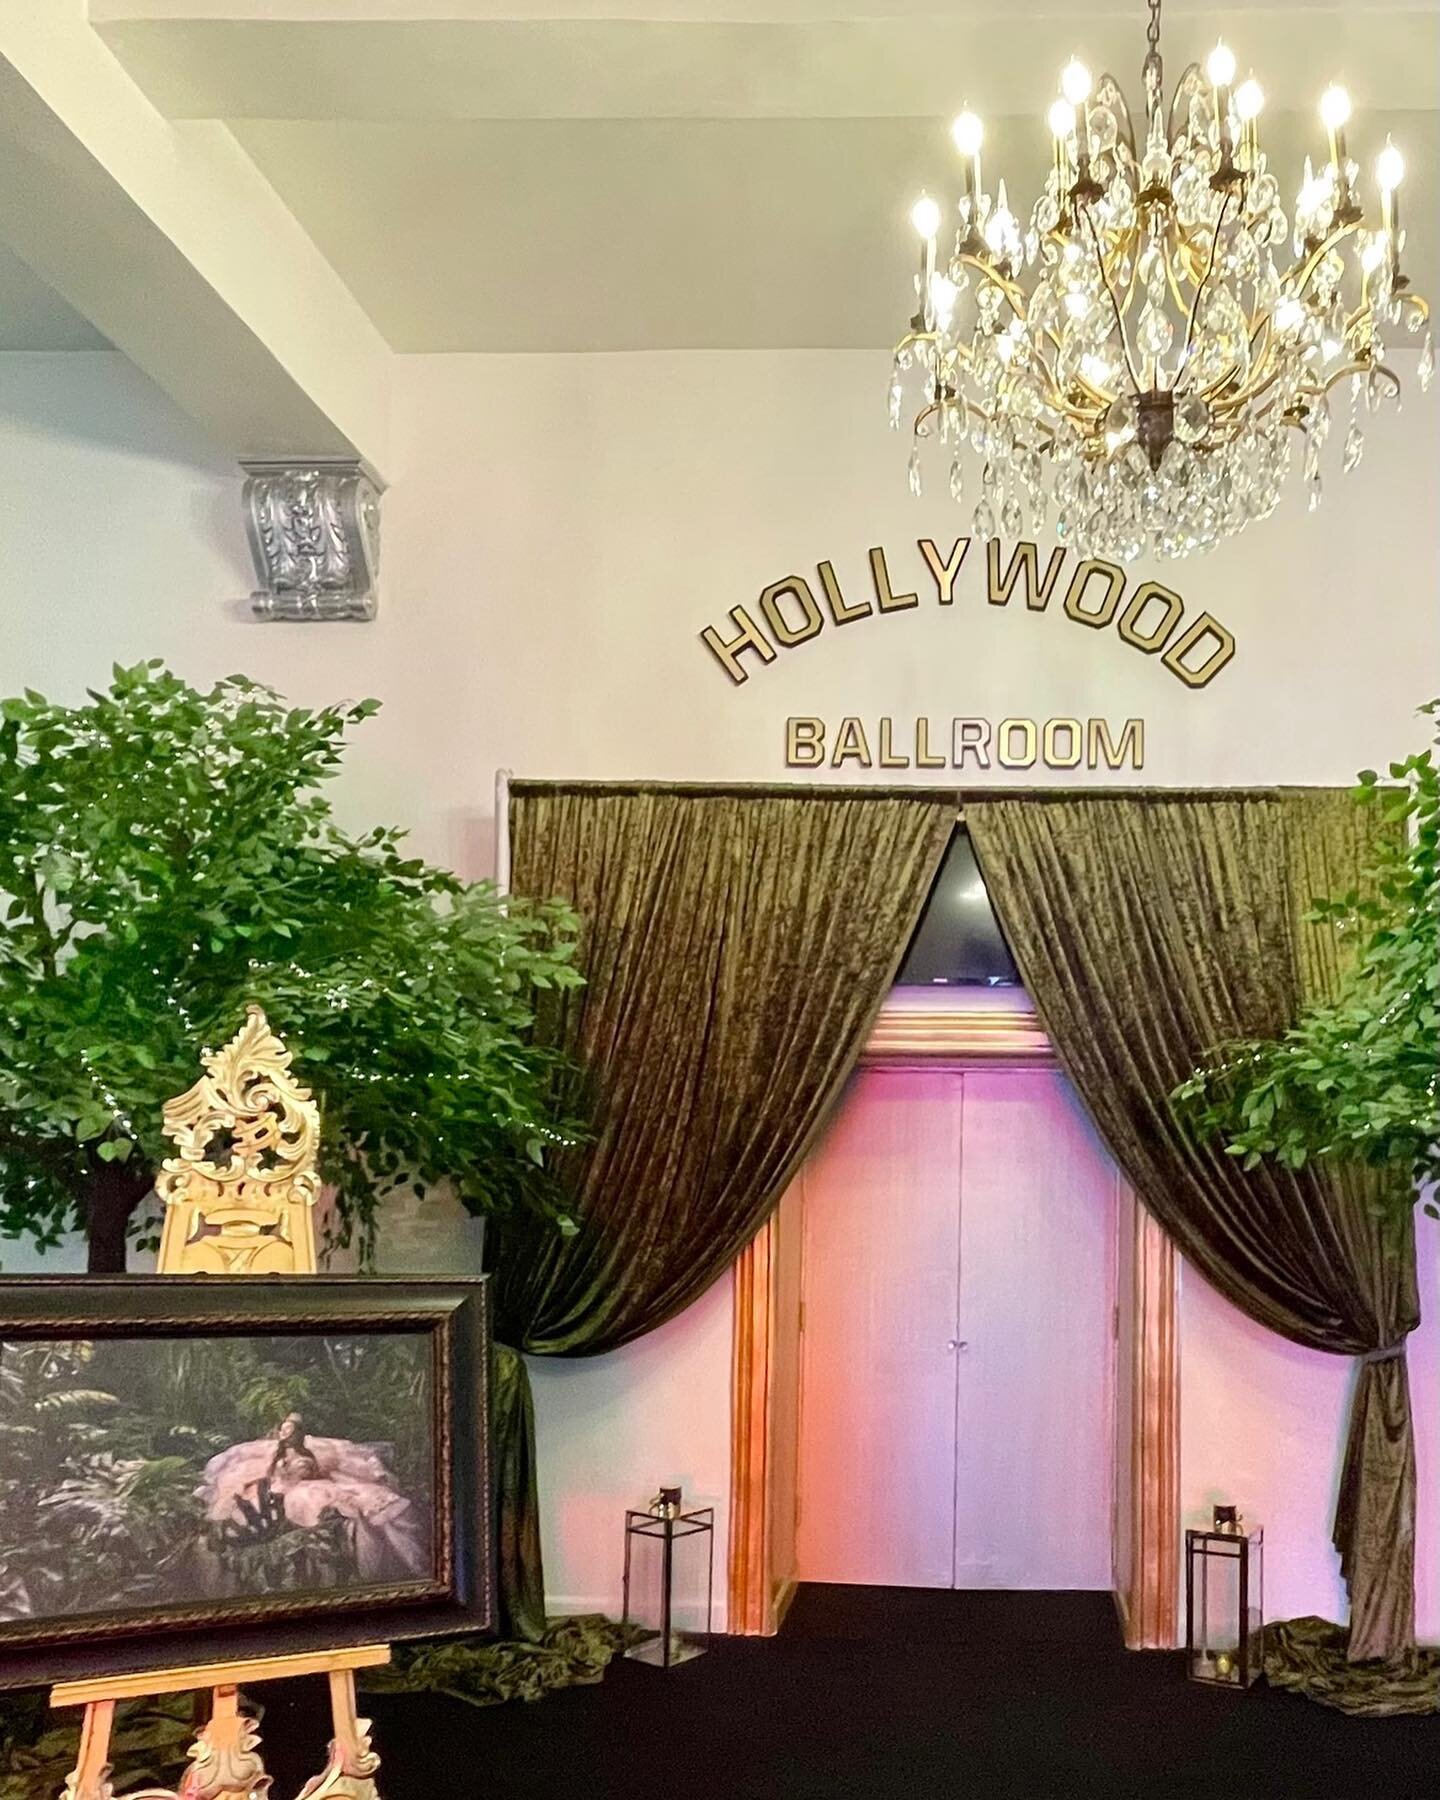 Step into the world of Hollywood glamour at our ballroom, where your Quincea&ntilde;era dreams come to life! Our venue combines sophistication, luxury, and unique personalization to create an unforgettable experience.